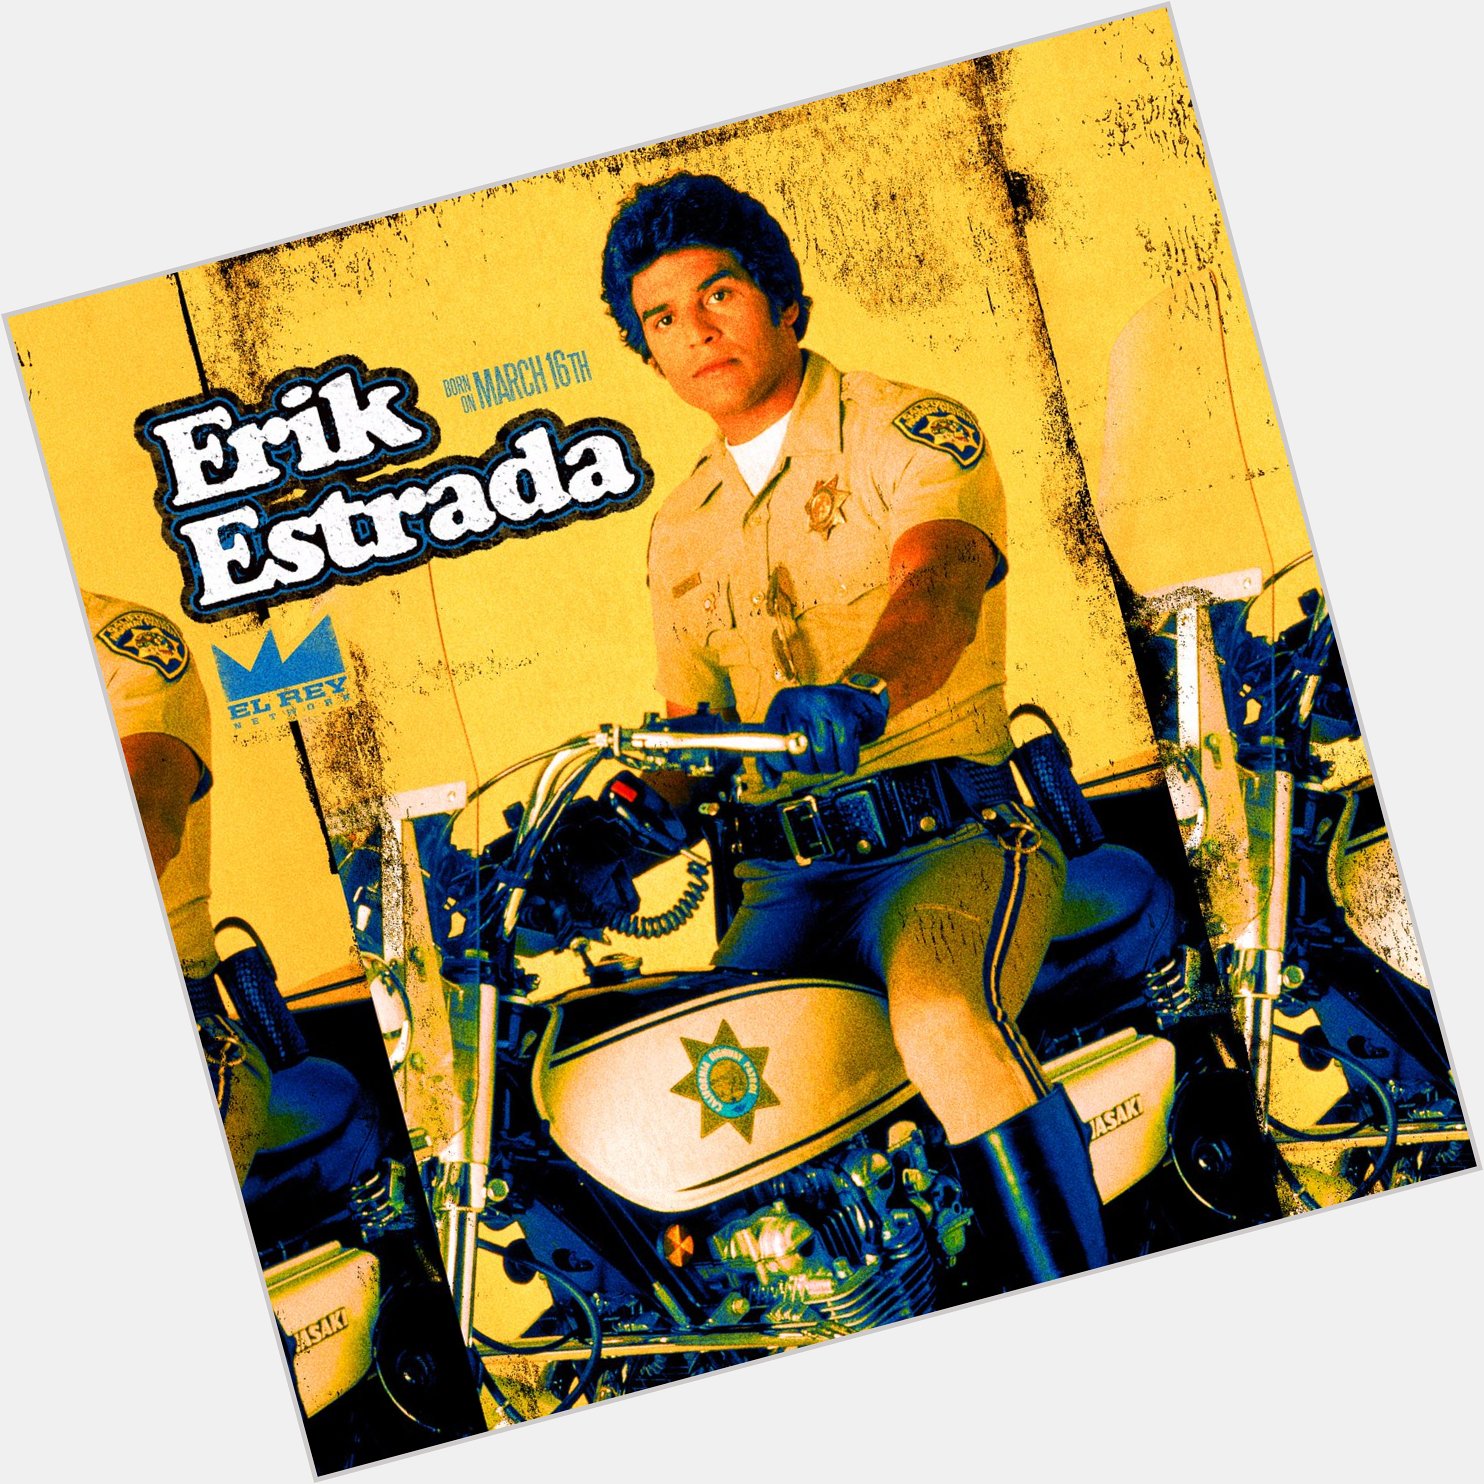 He patrolled the streets on our screens and in real life. Happy Birthday to Erik Estrada from 